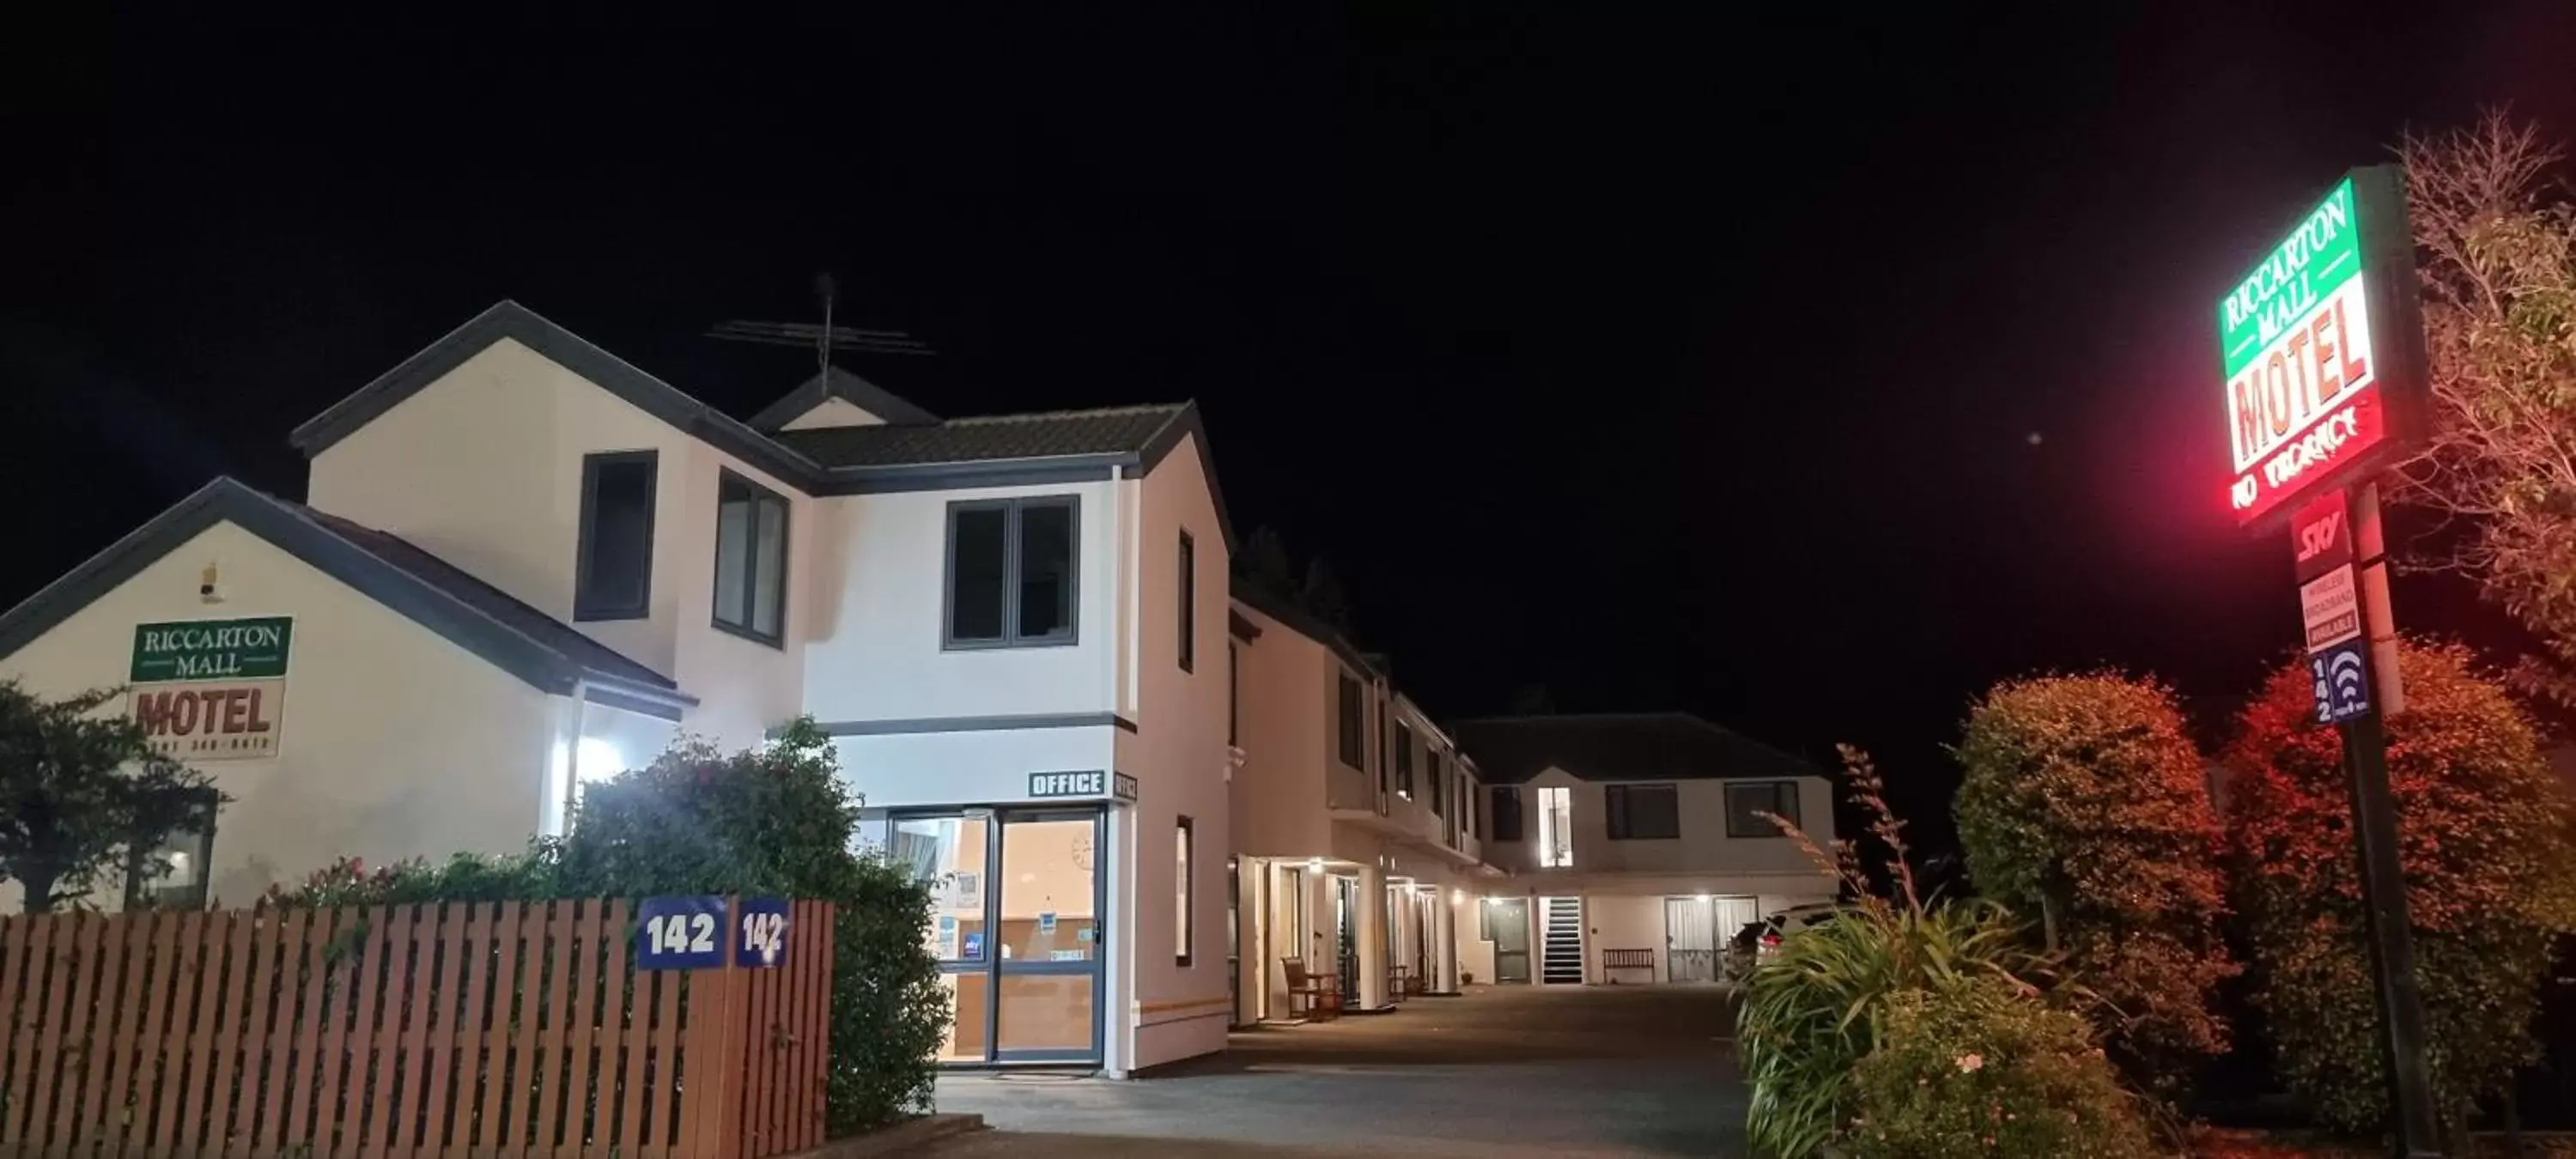 Property Building in Riccarton Mall Motel